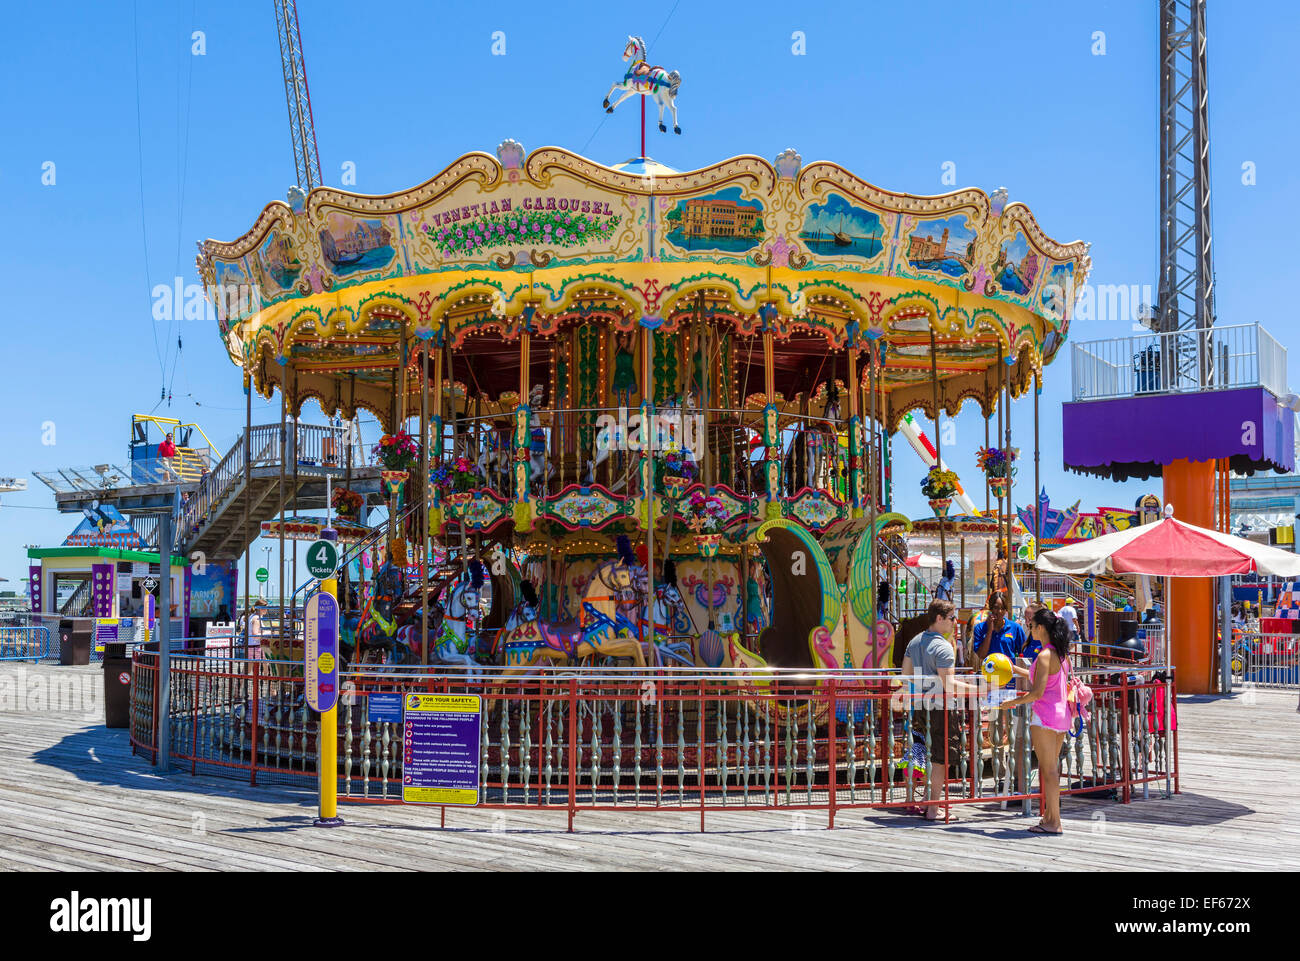 Carousel sur Surfside Pier, North Wildwood, Cape May County, New Jersey, USA Banque D'Images